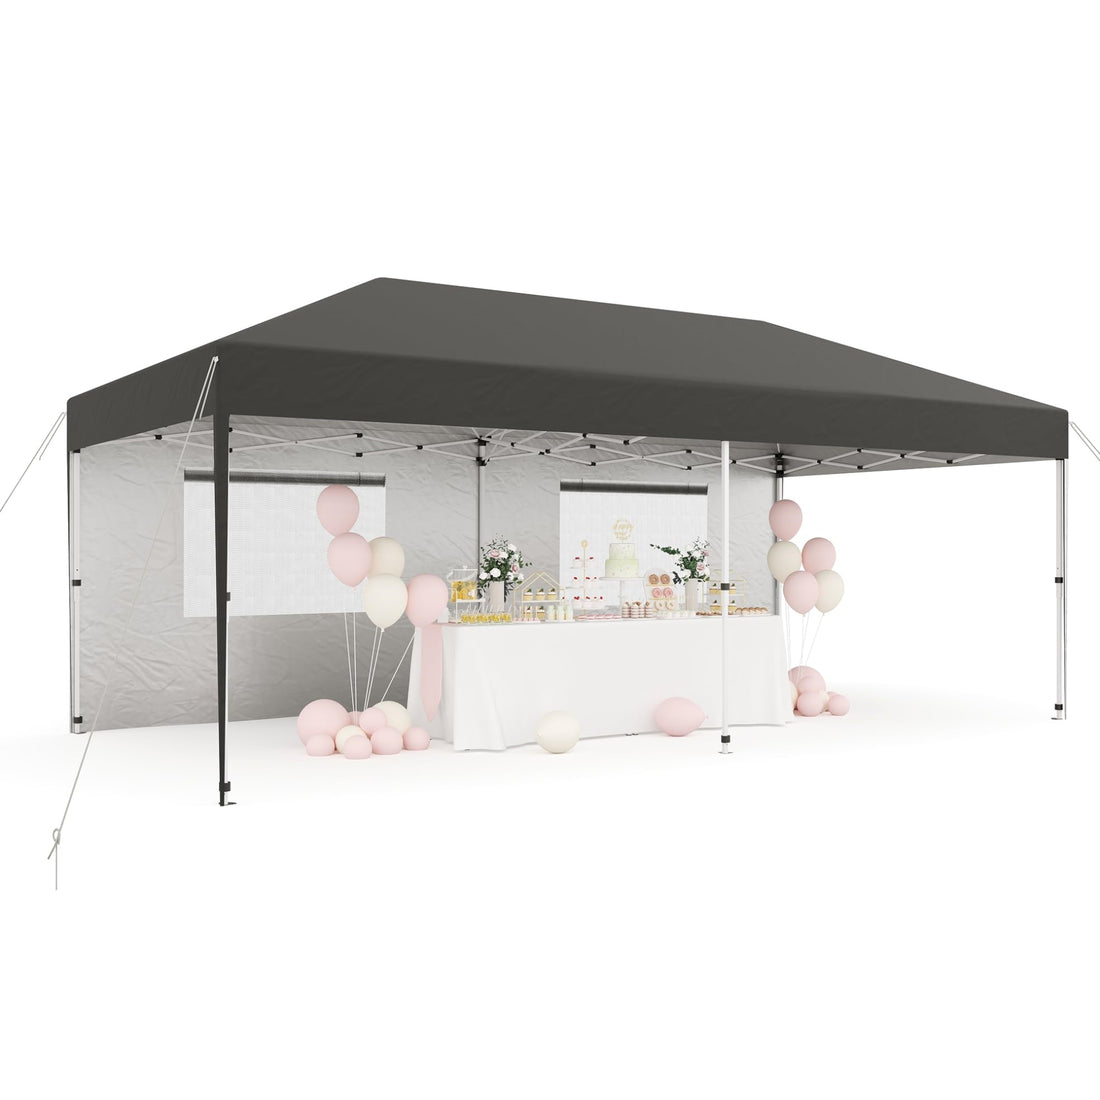 10ftx20ft Pop Up Canopy Tent with Sidewalls, 210D Oxford, Black